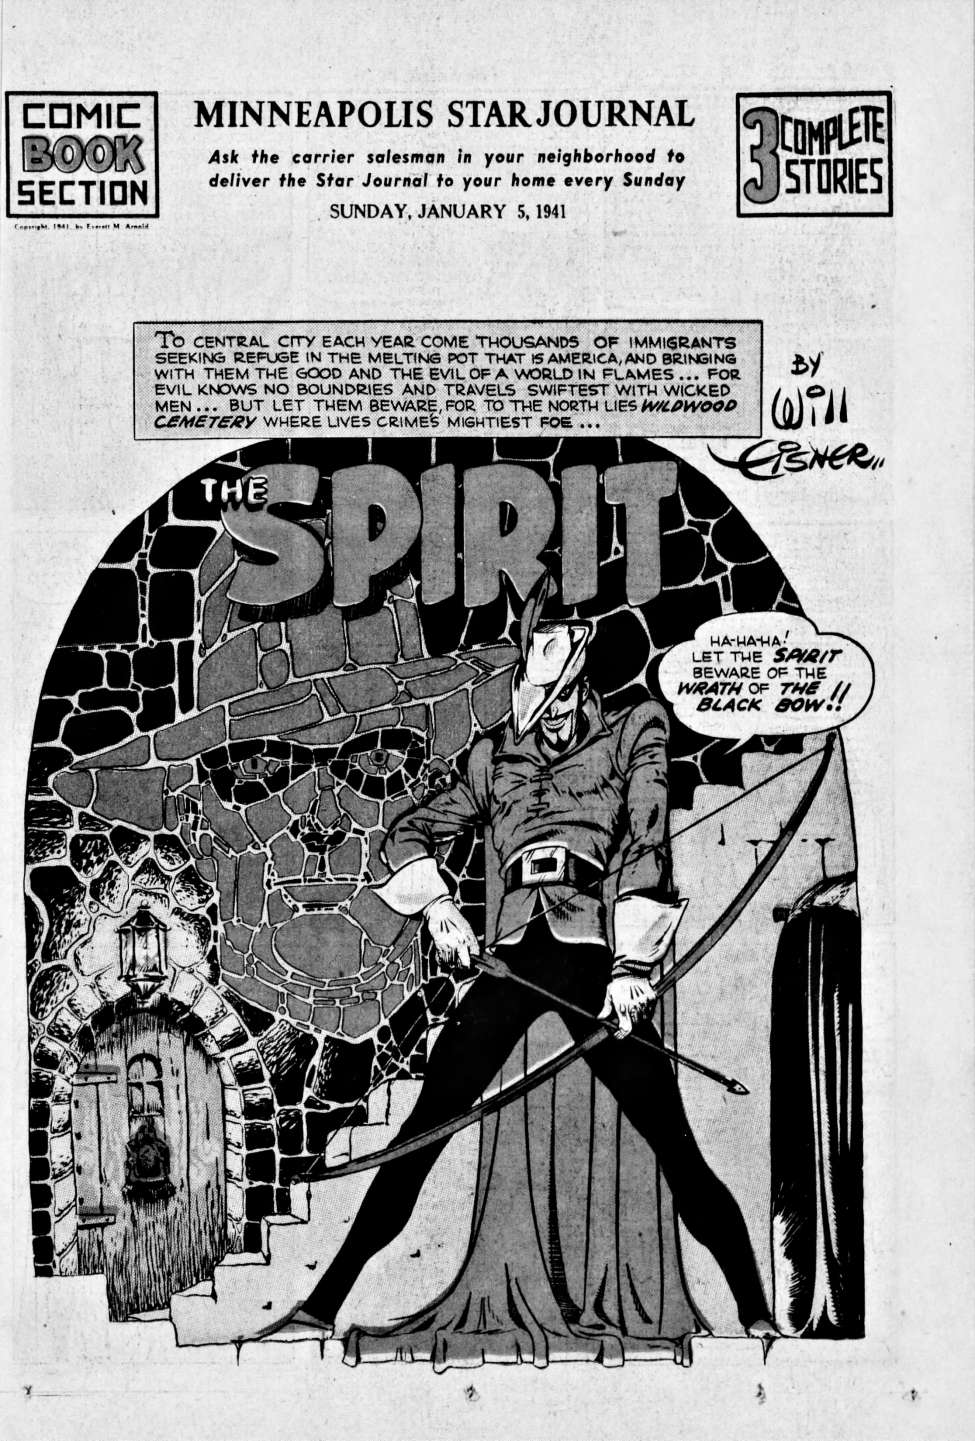 Book Cover For The Spirit (1941-01-05) - Minneapolis Star Journal (b/w)